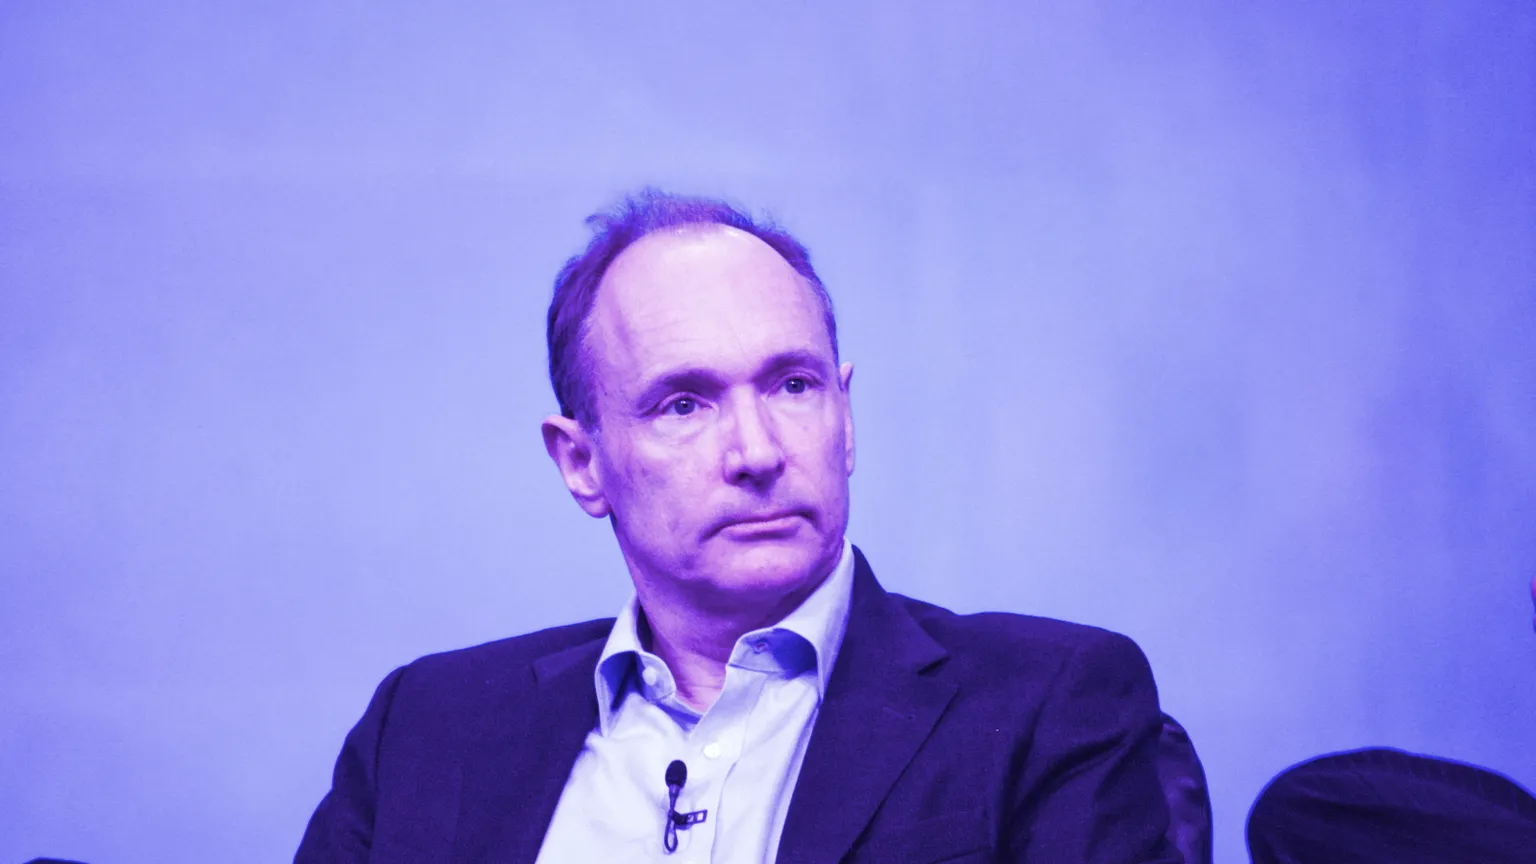 Tim Berners-Lee invented the World Wide Web. Image: Shutterstock